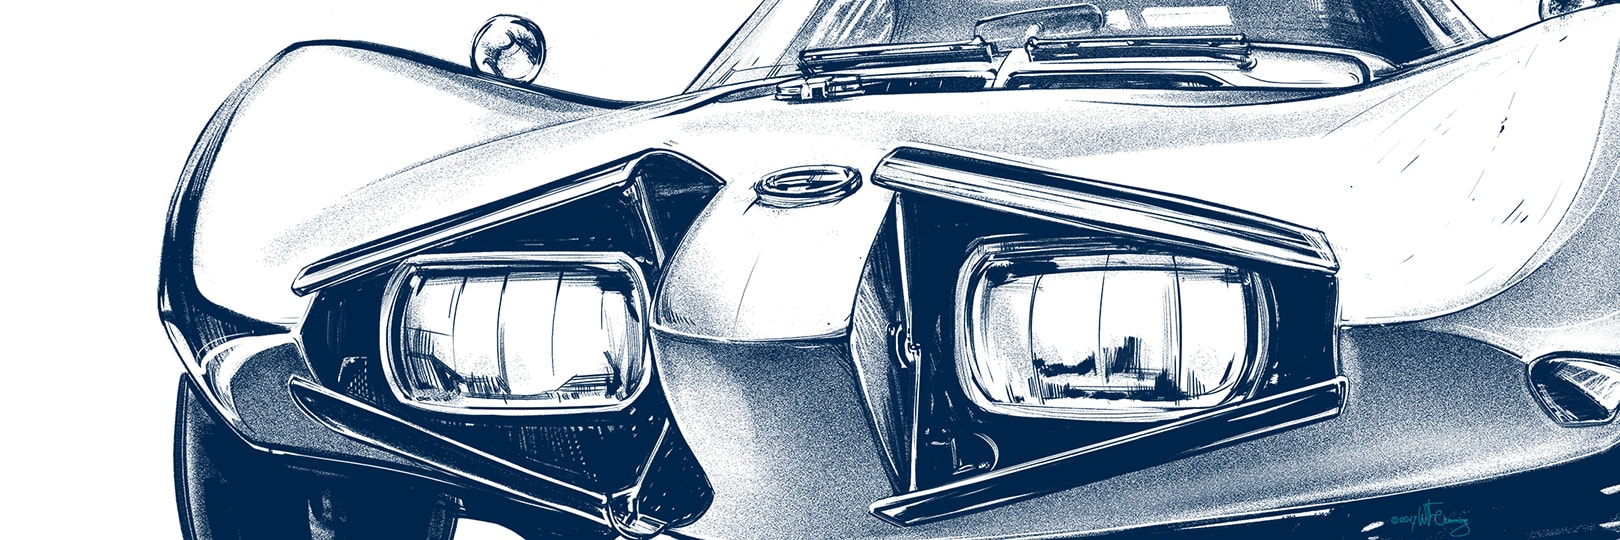 Corvair_coupe_inked_by_WFlemming